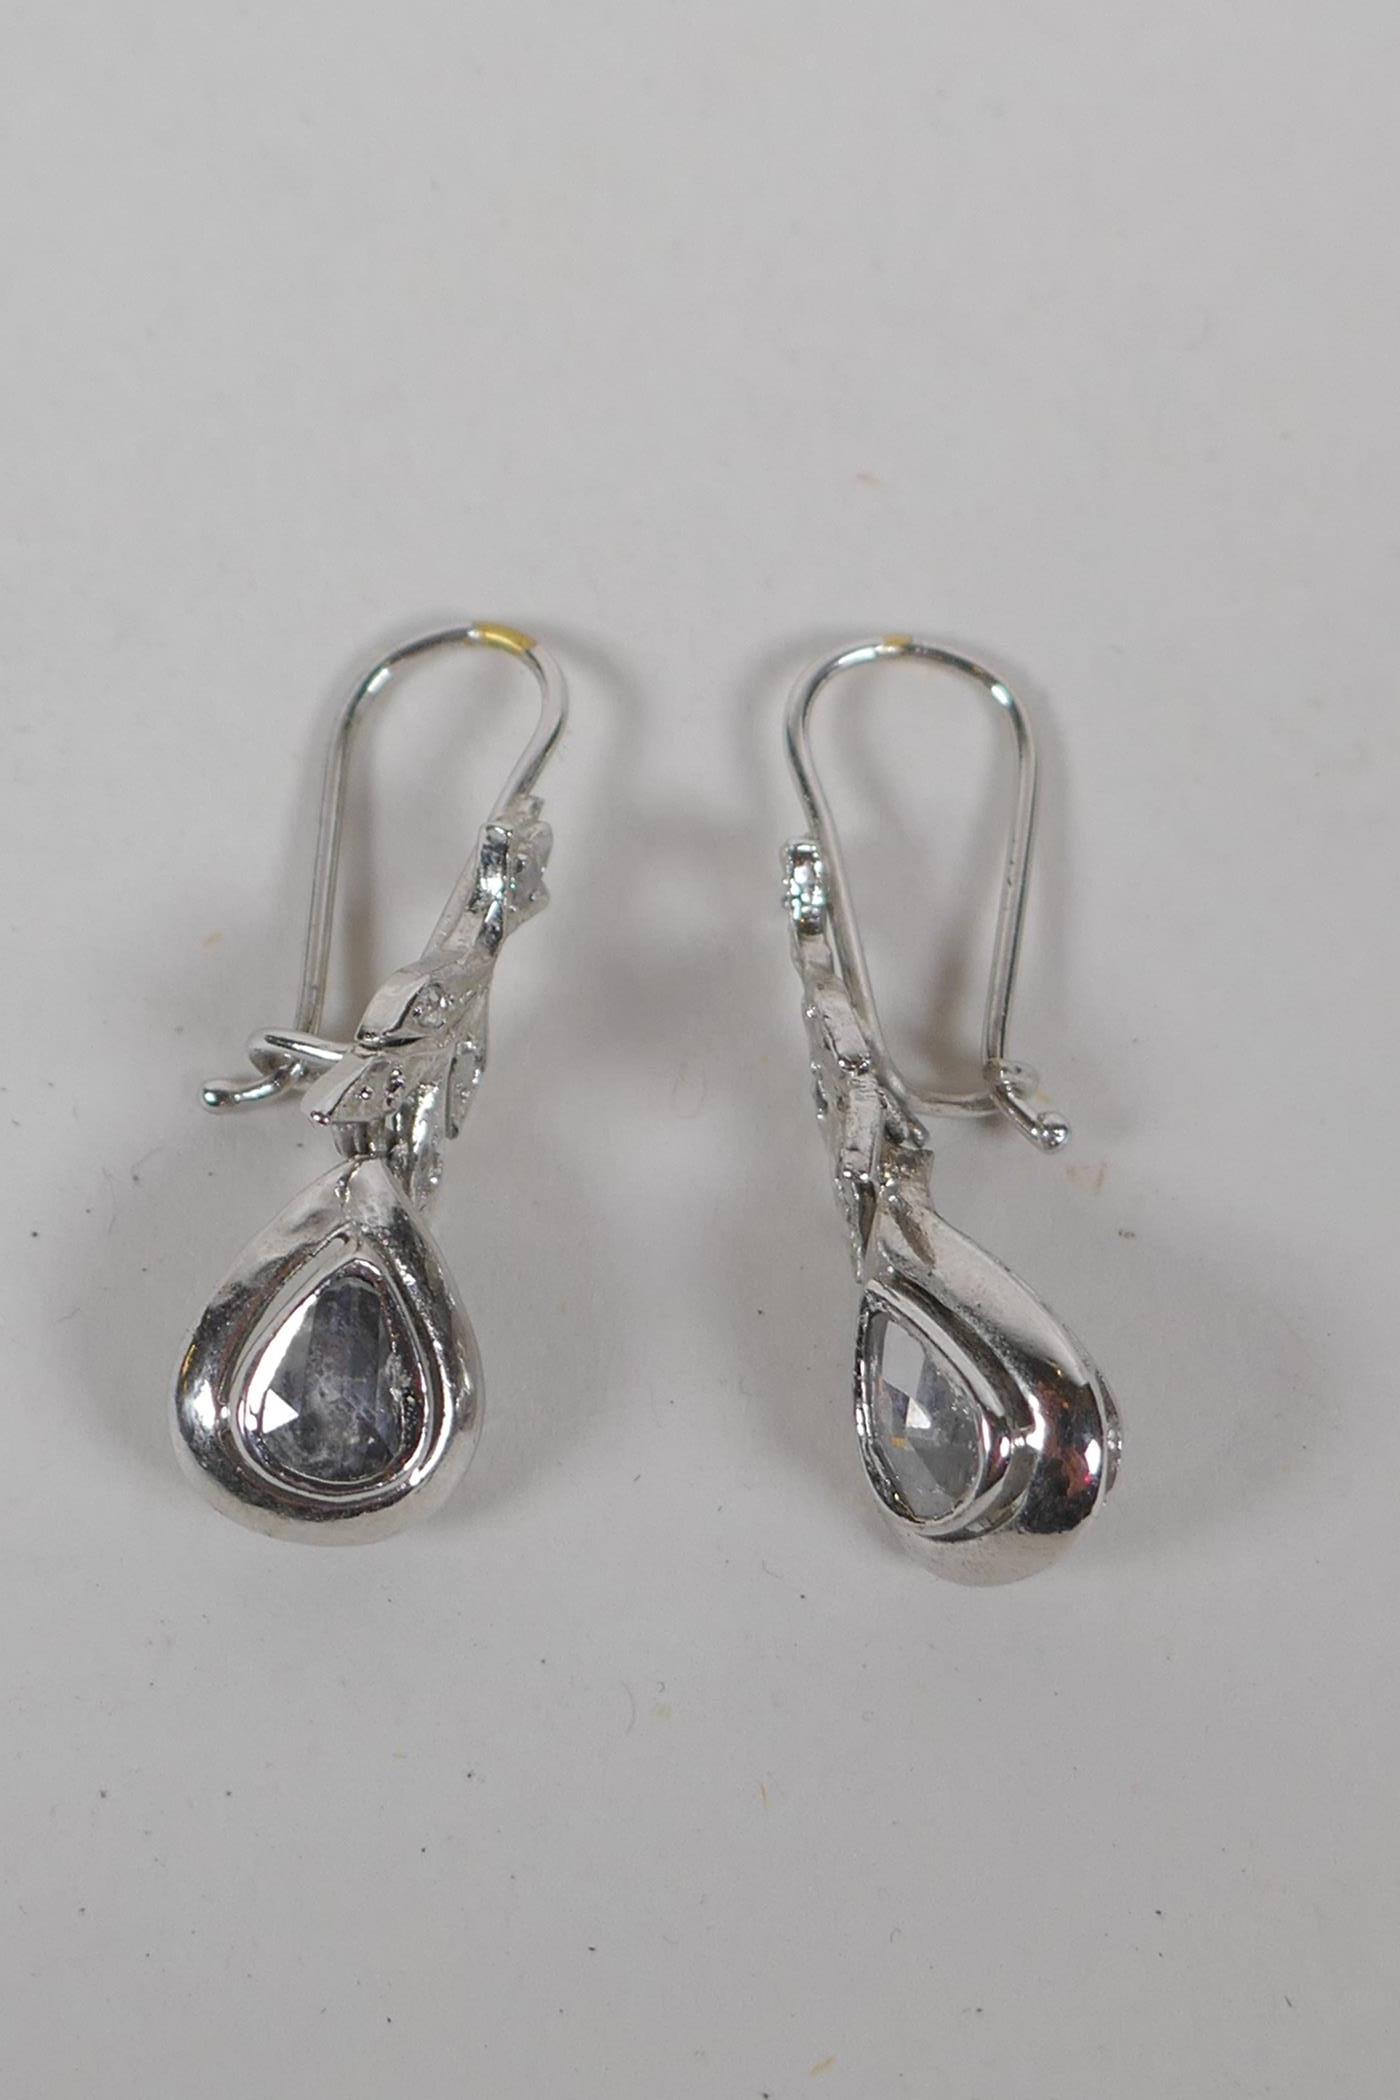 A pair of Iranian plated yellow metal drop earrings set with diamonds